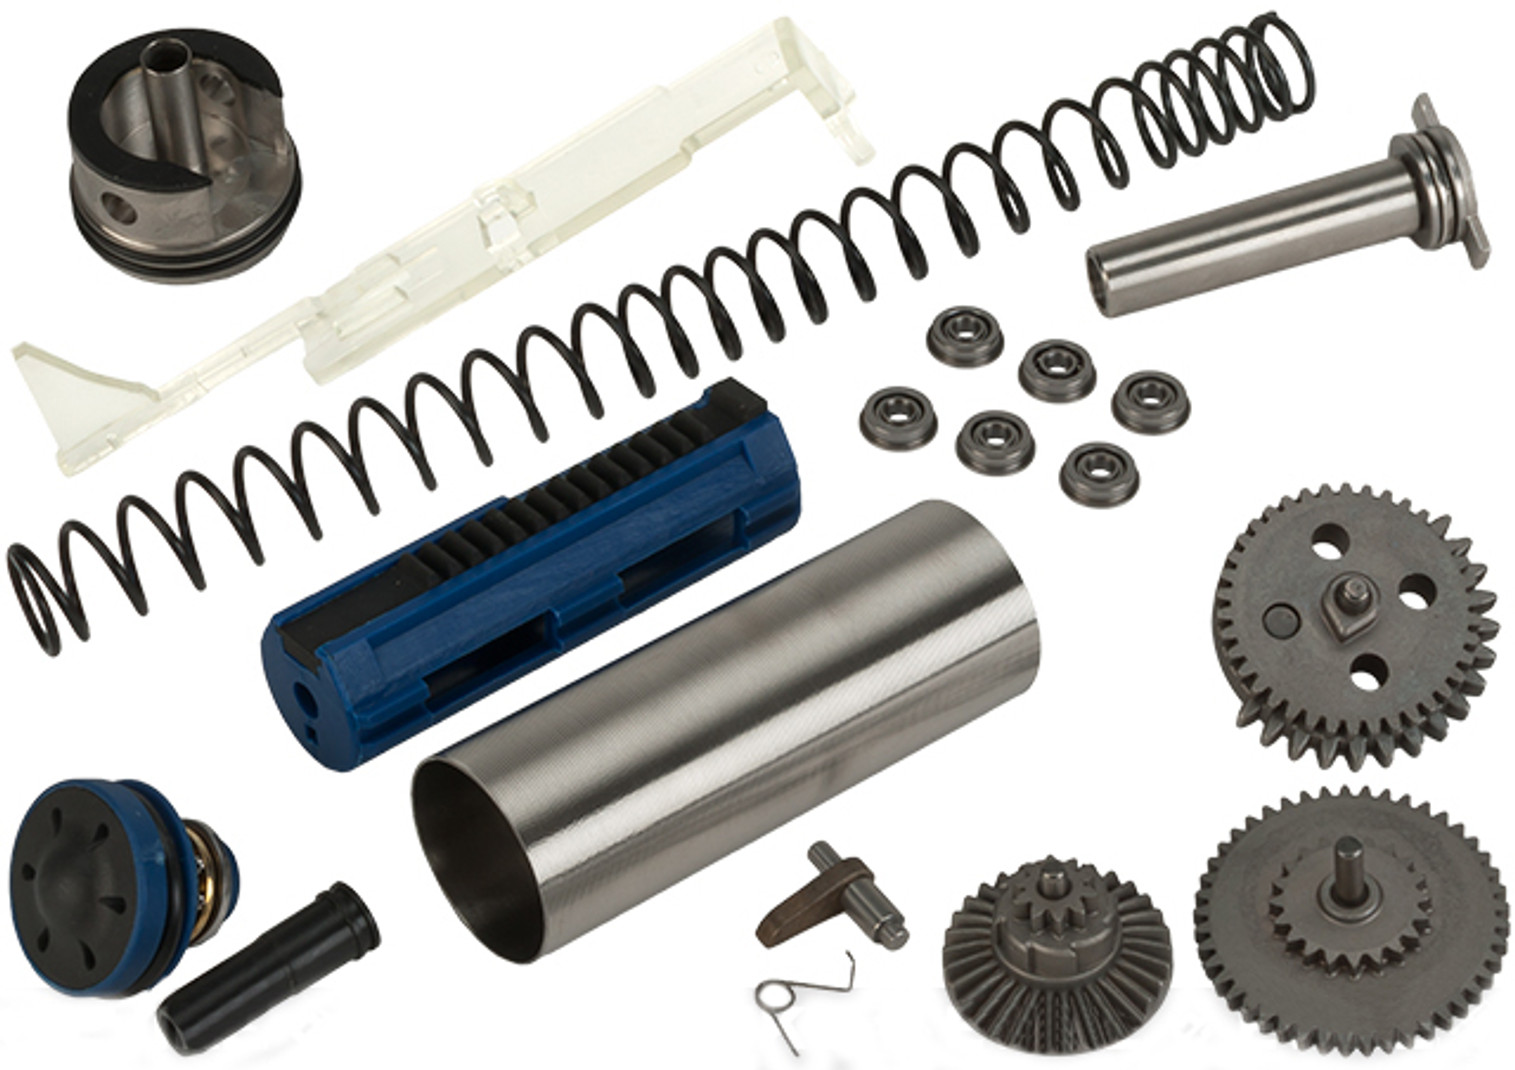 BAAL Airsoft Performance Upgrade Series Expert Tune-Up Kit for AUG Series Airsoft AEG Gearboxes - M150